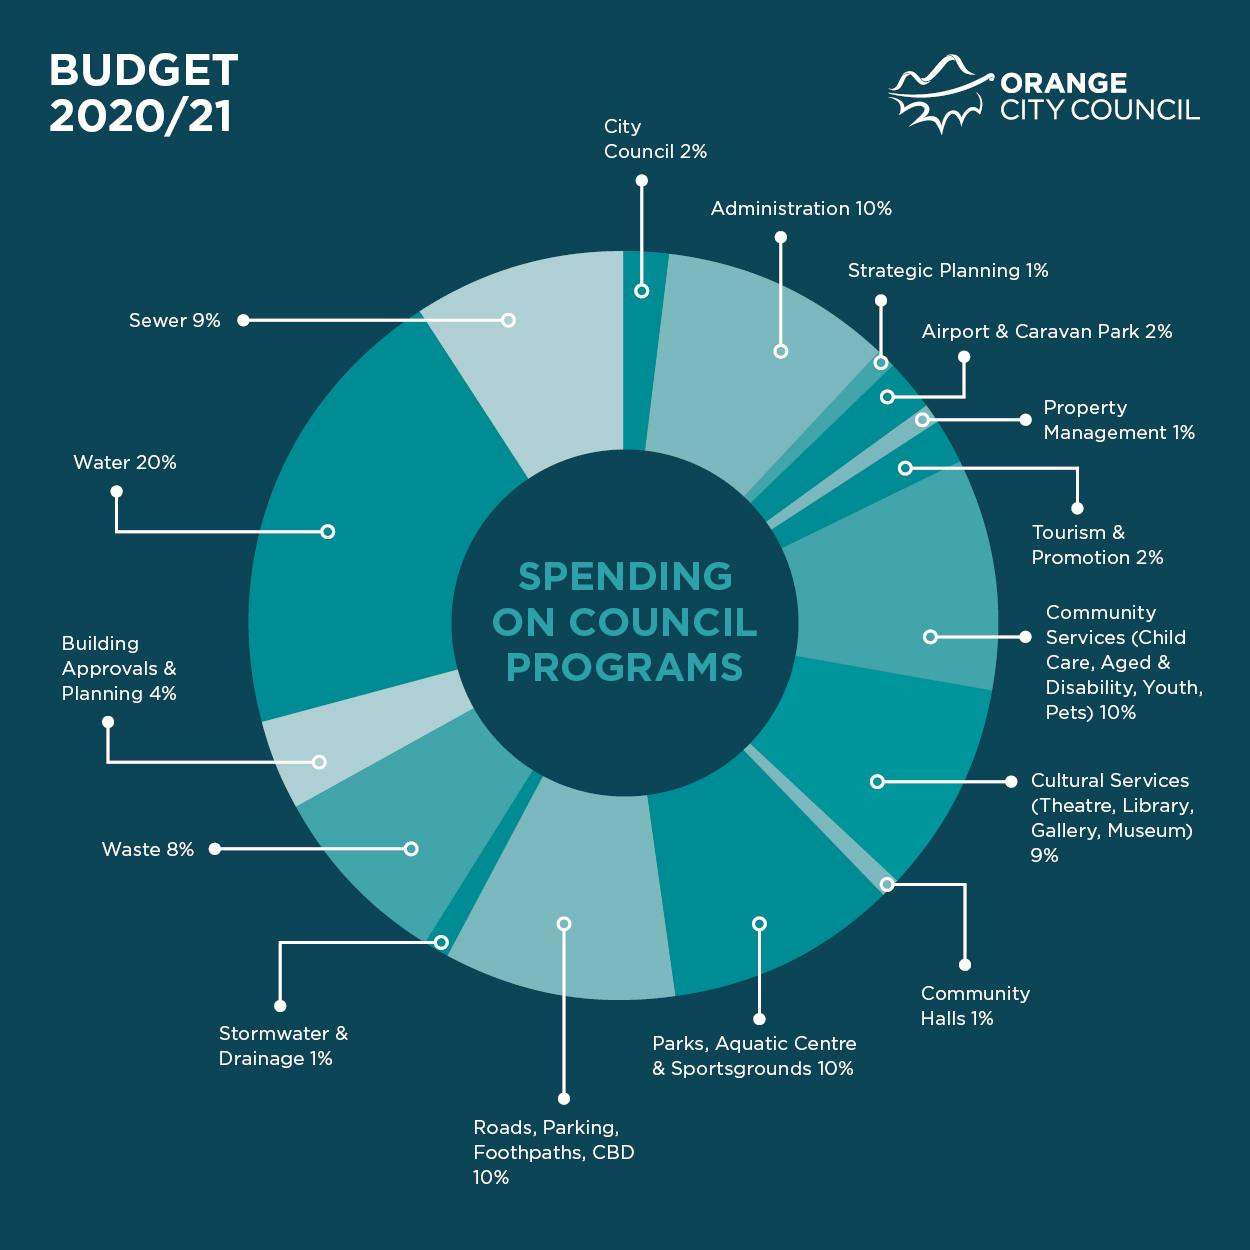 Proposed spending areas in the budget